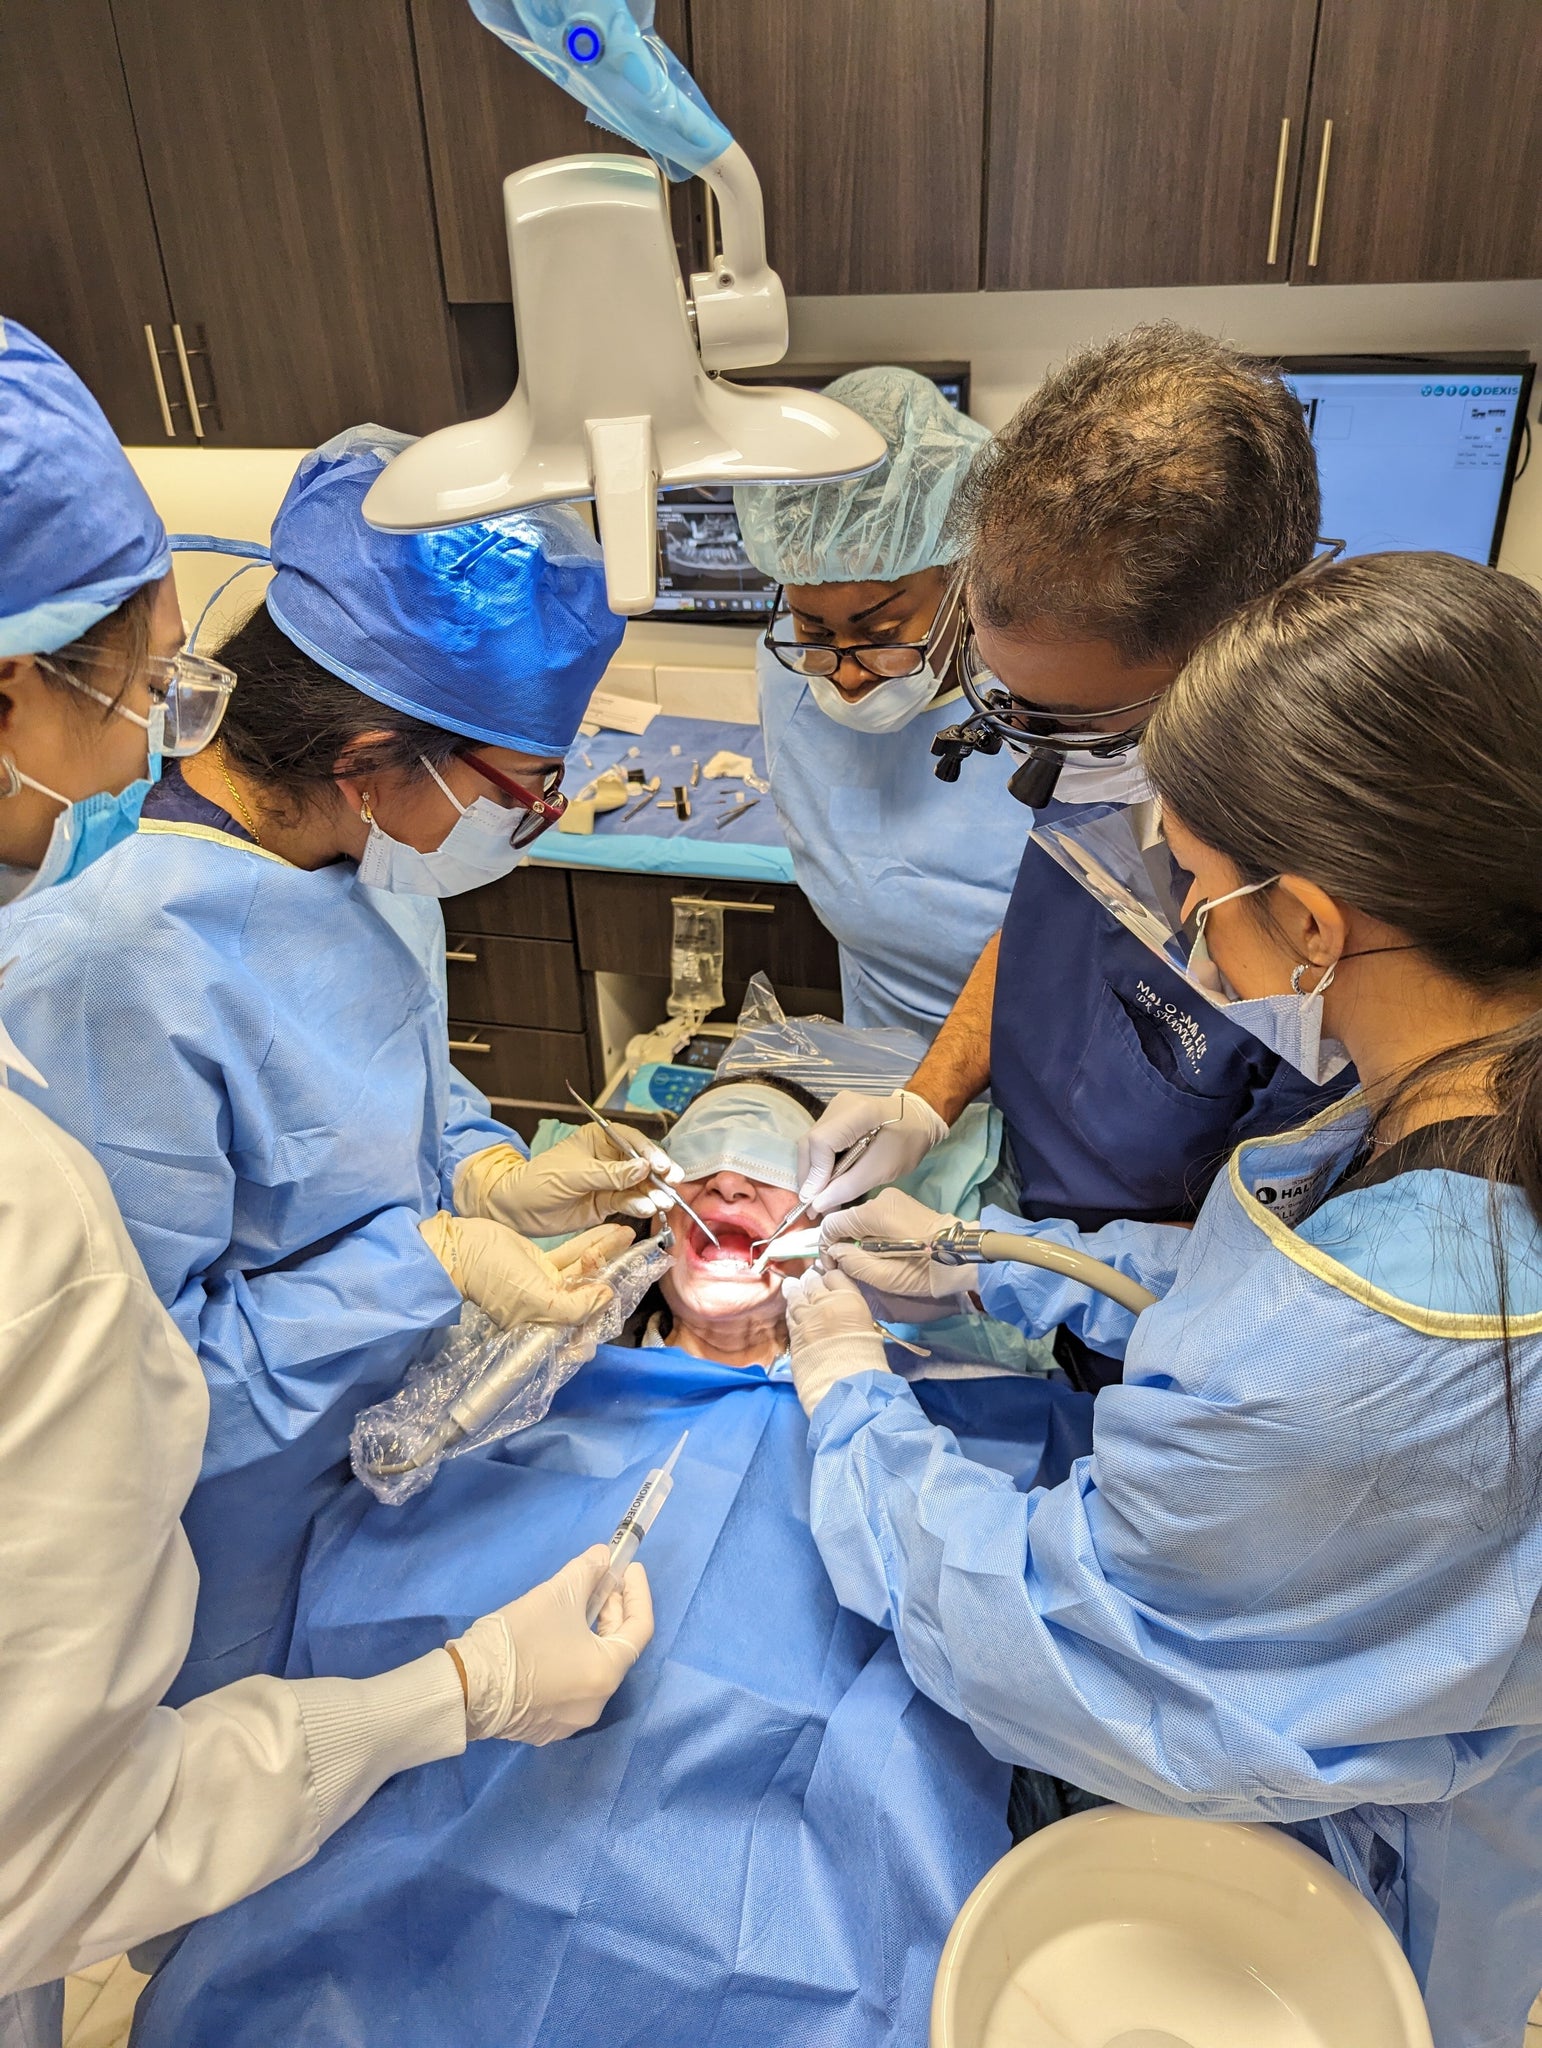 Mainstream Implant Live Surgery Course: Comprehensive Training - New Jersey - September